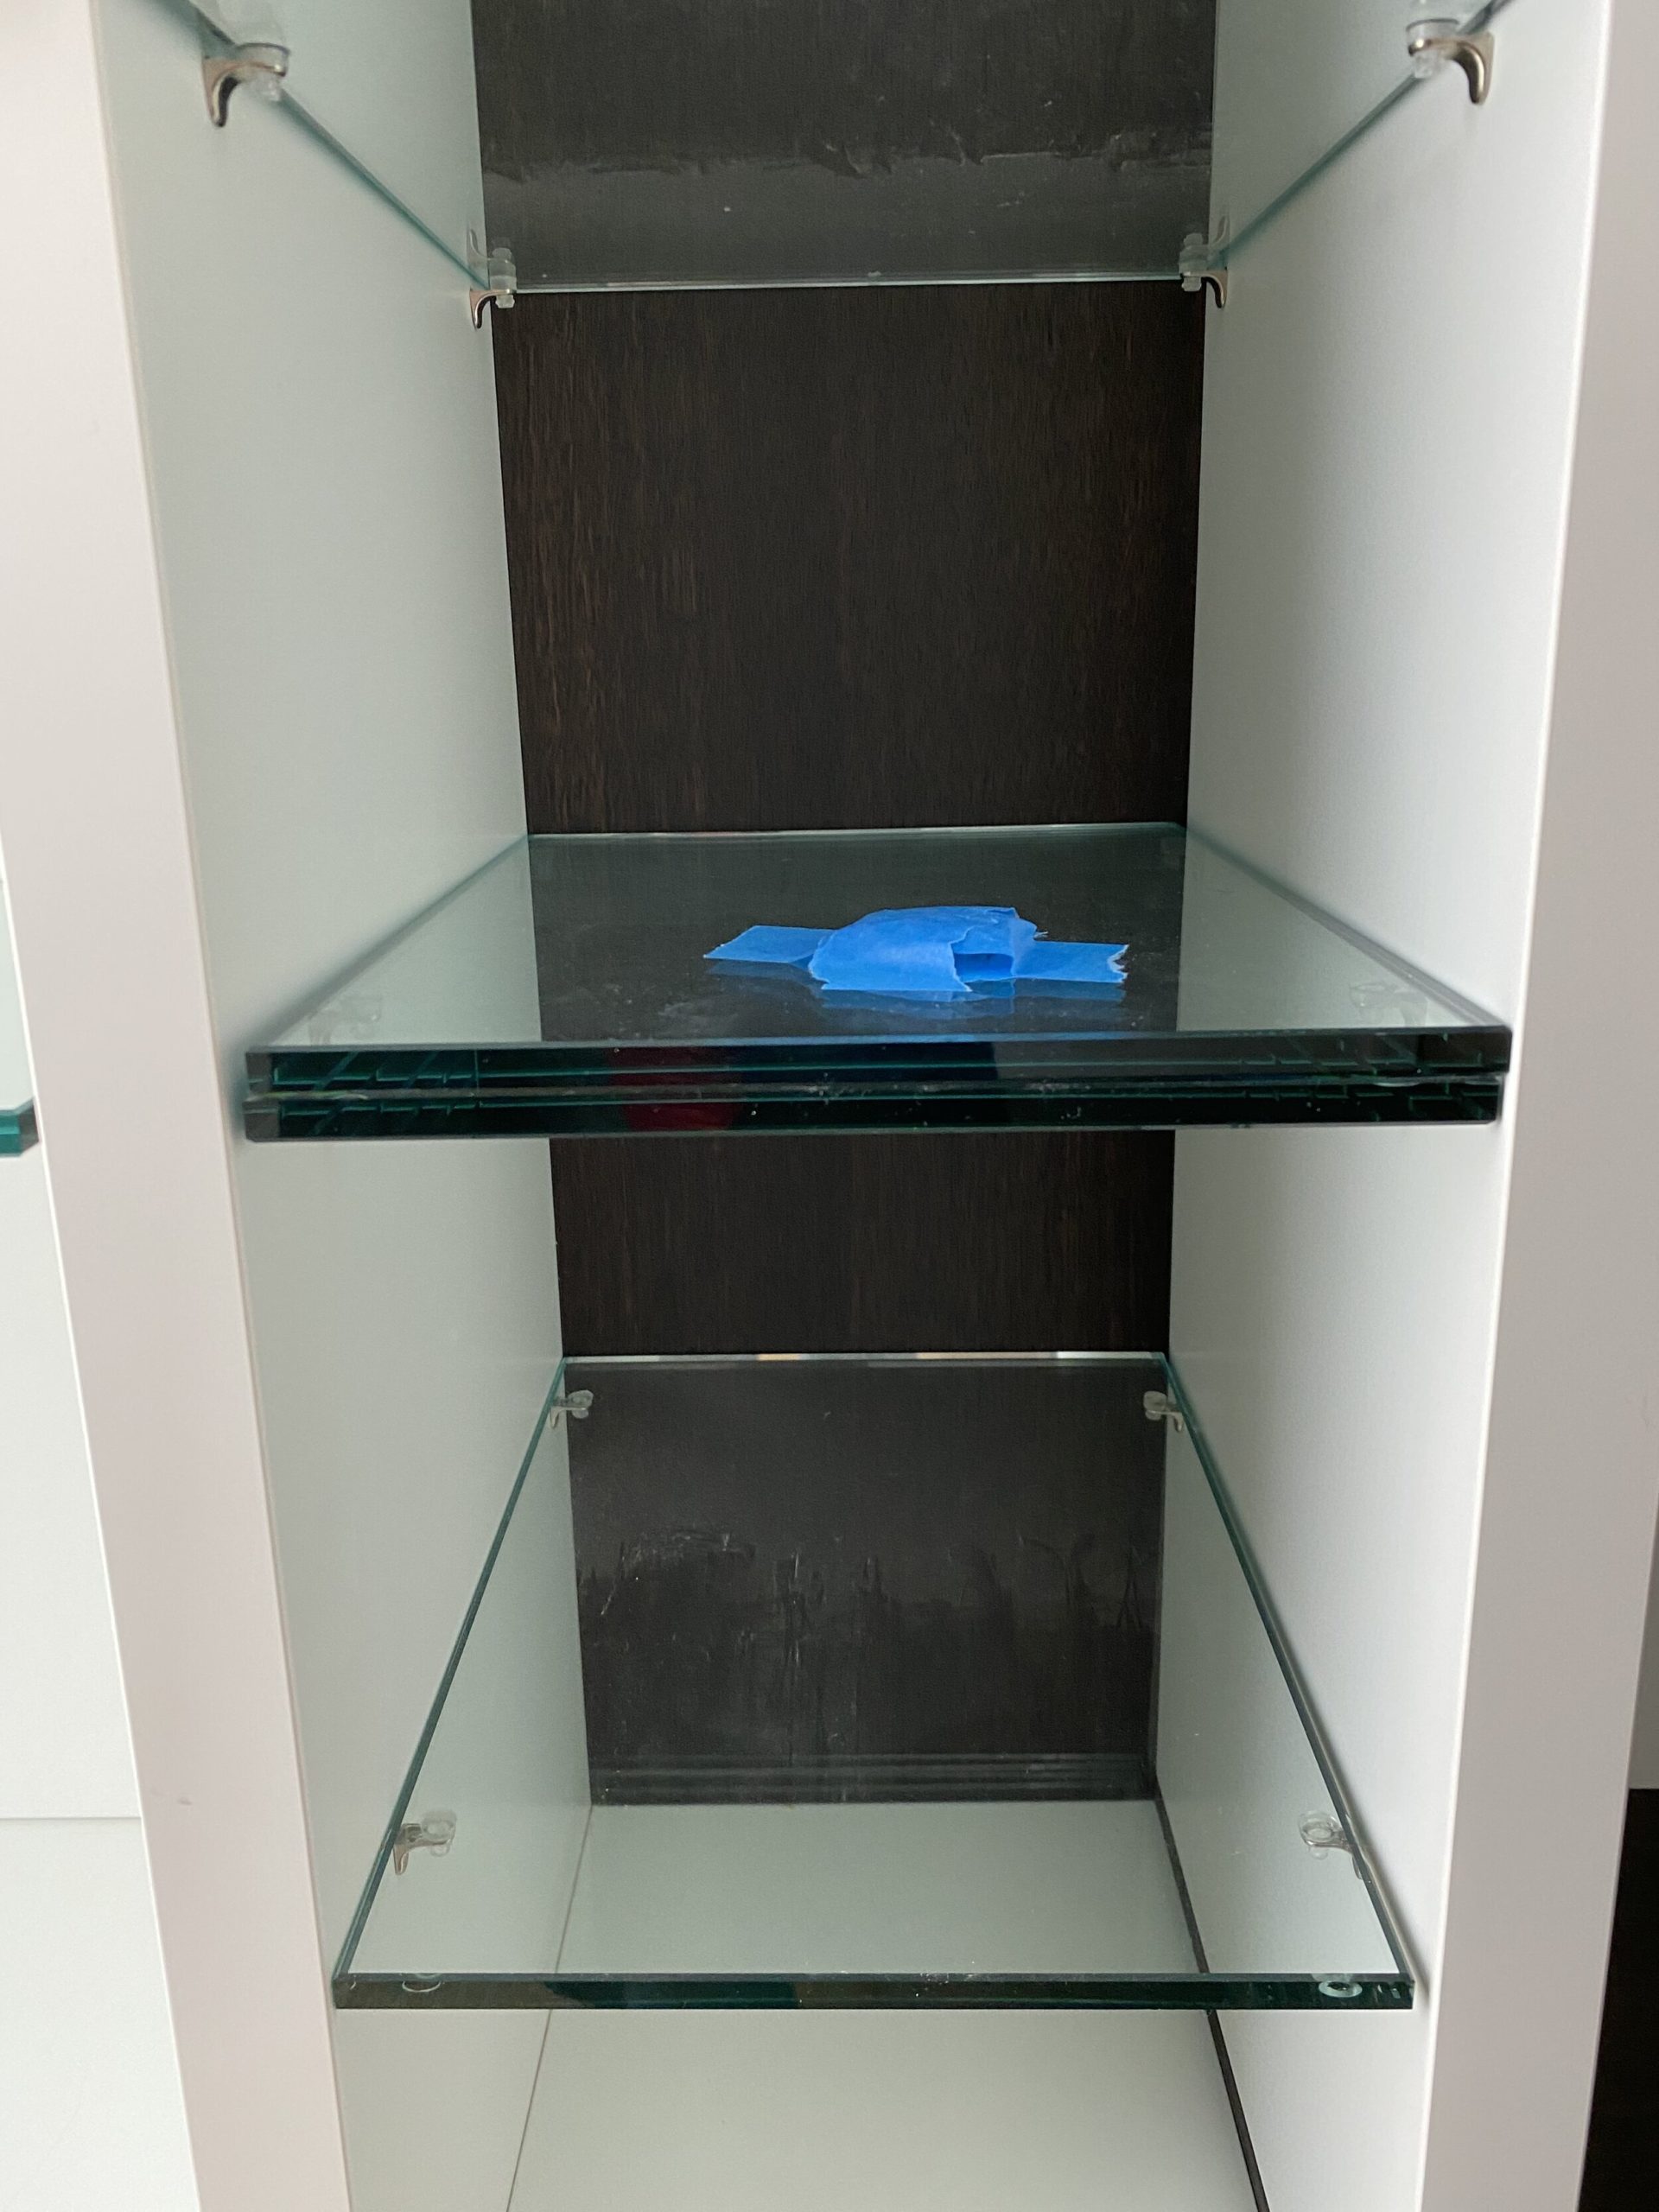 Additional Glass Shelf Available